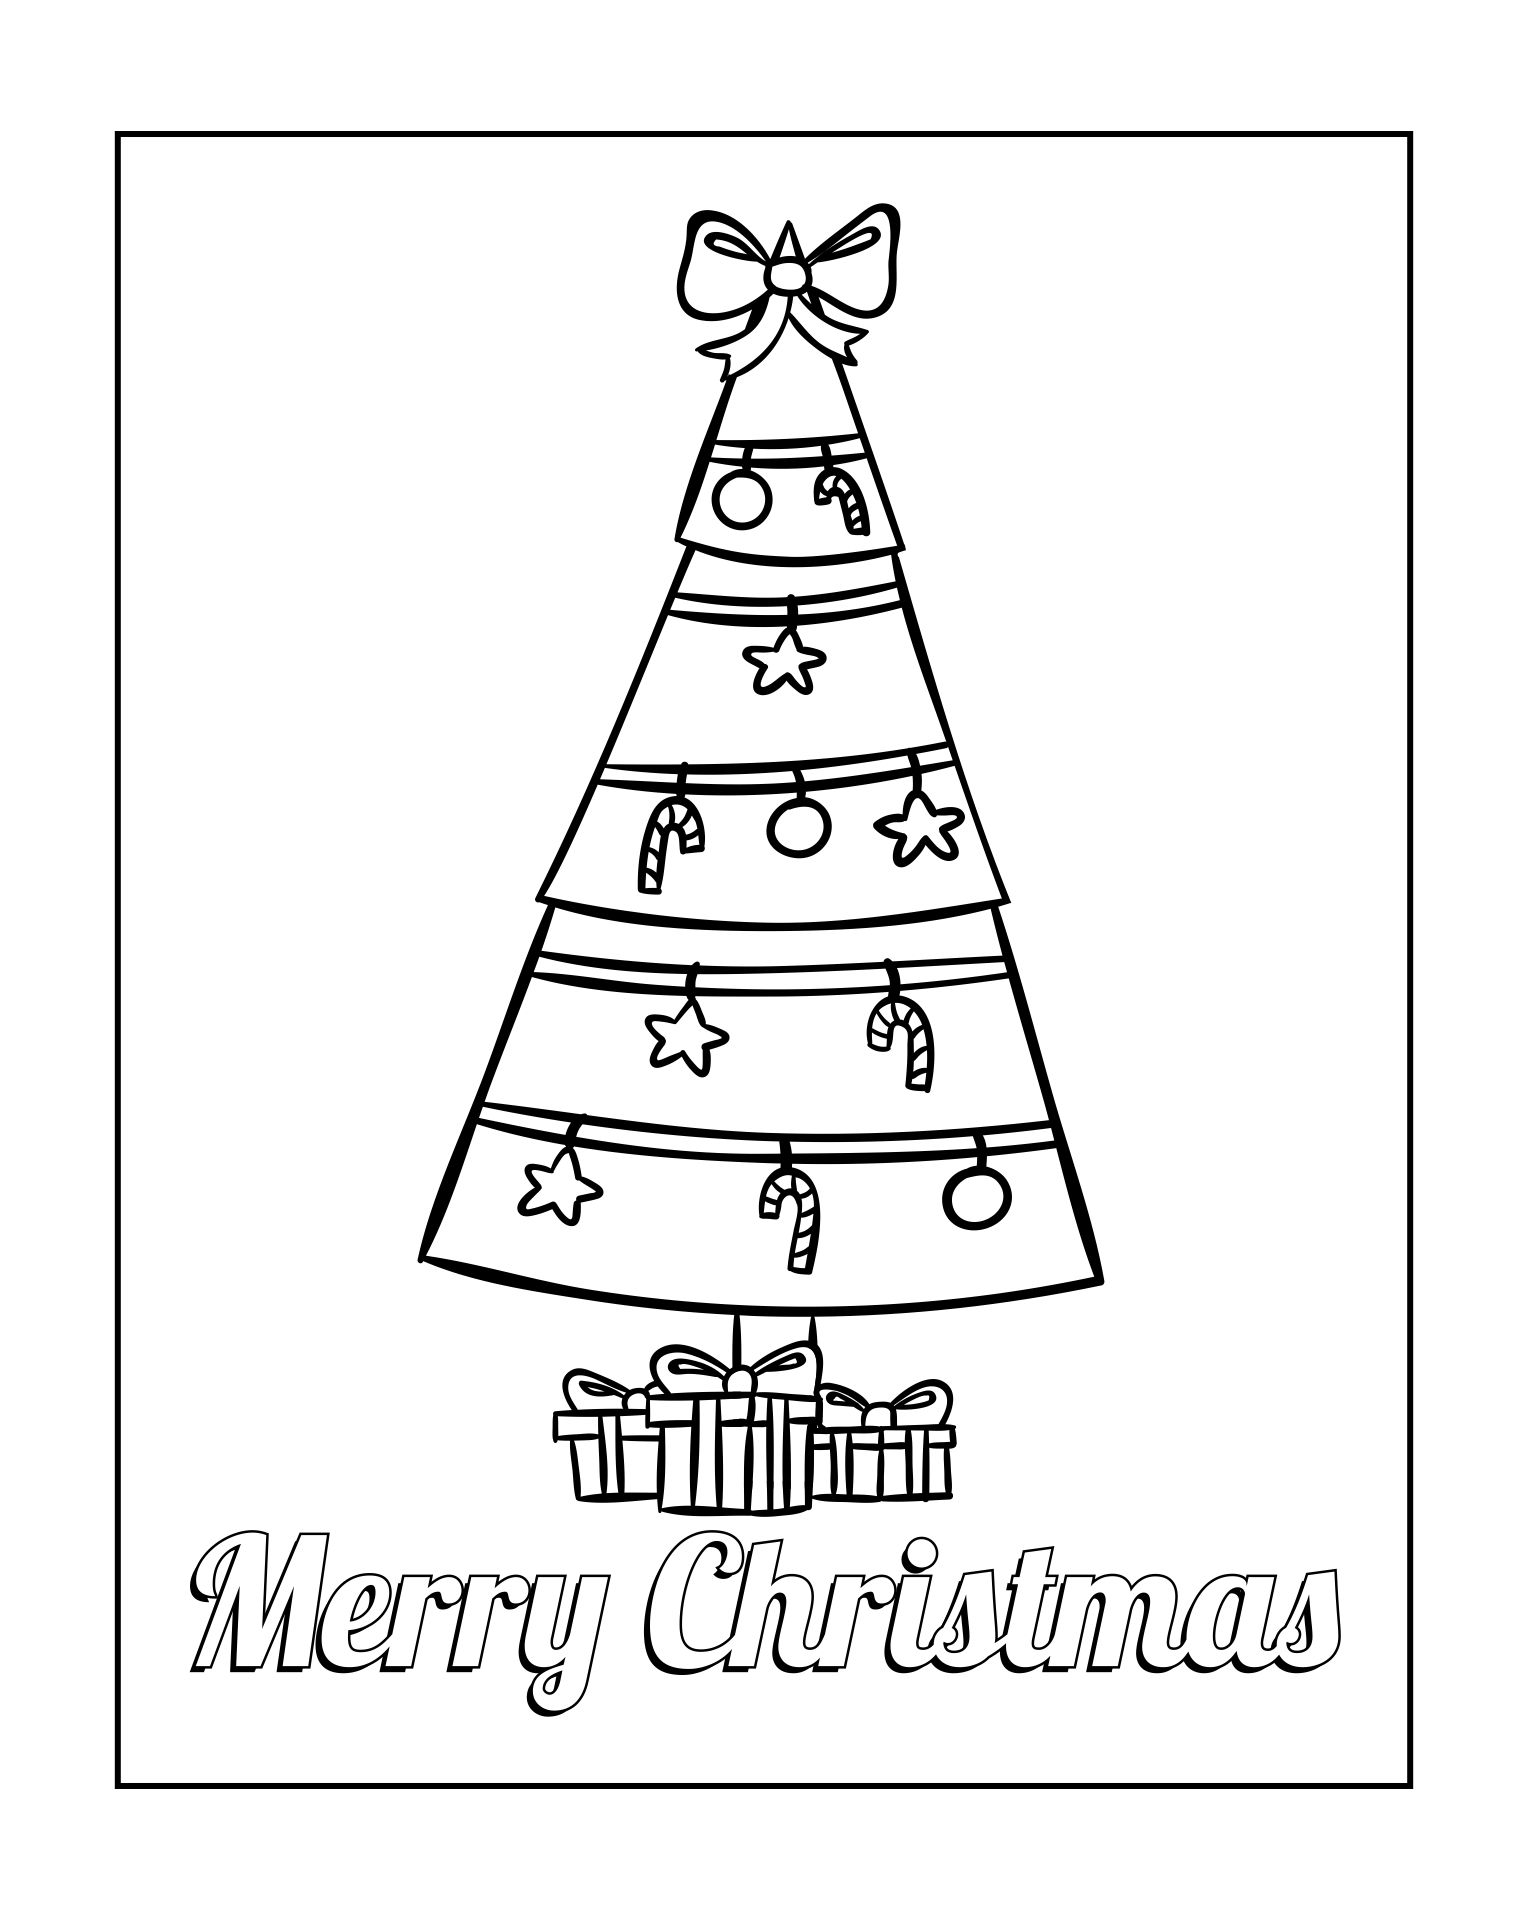 Merry Christmas Card With Trees Coloring Page Printable